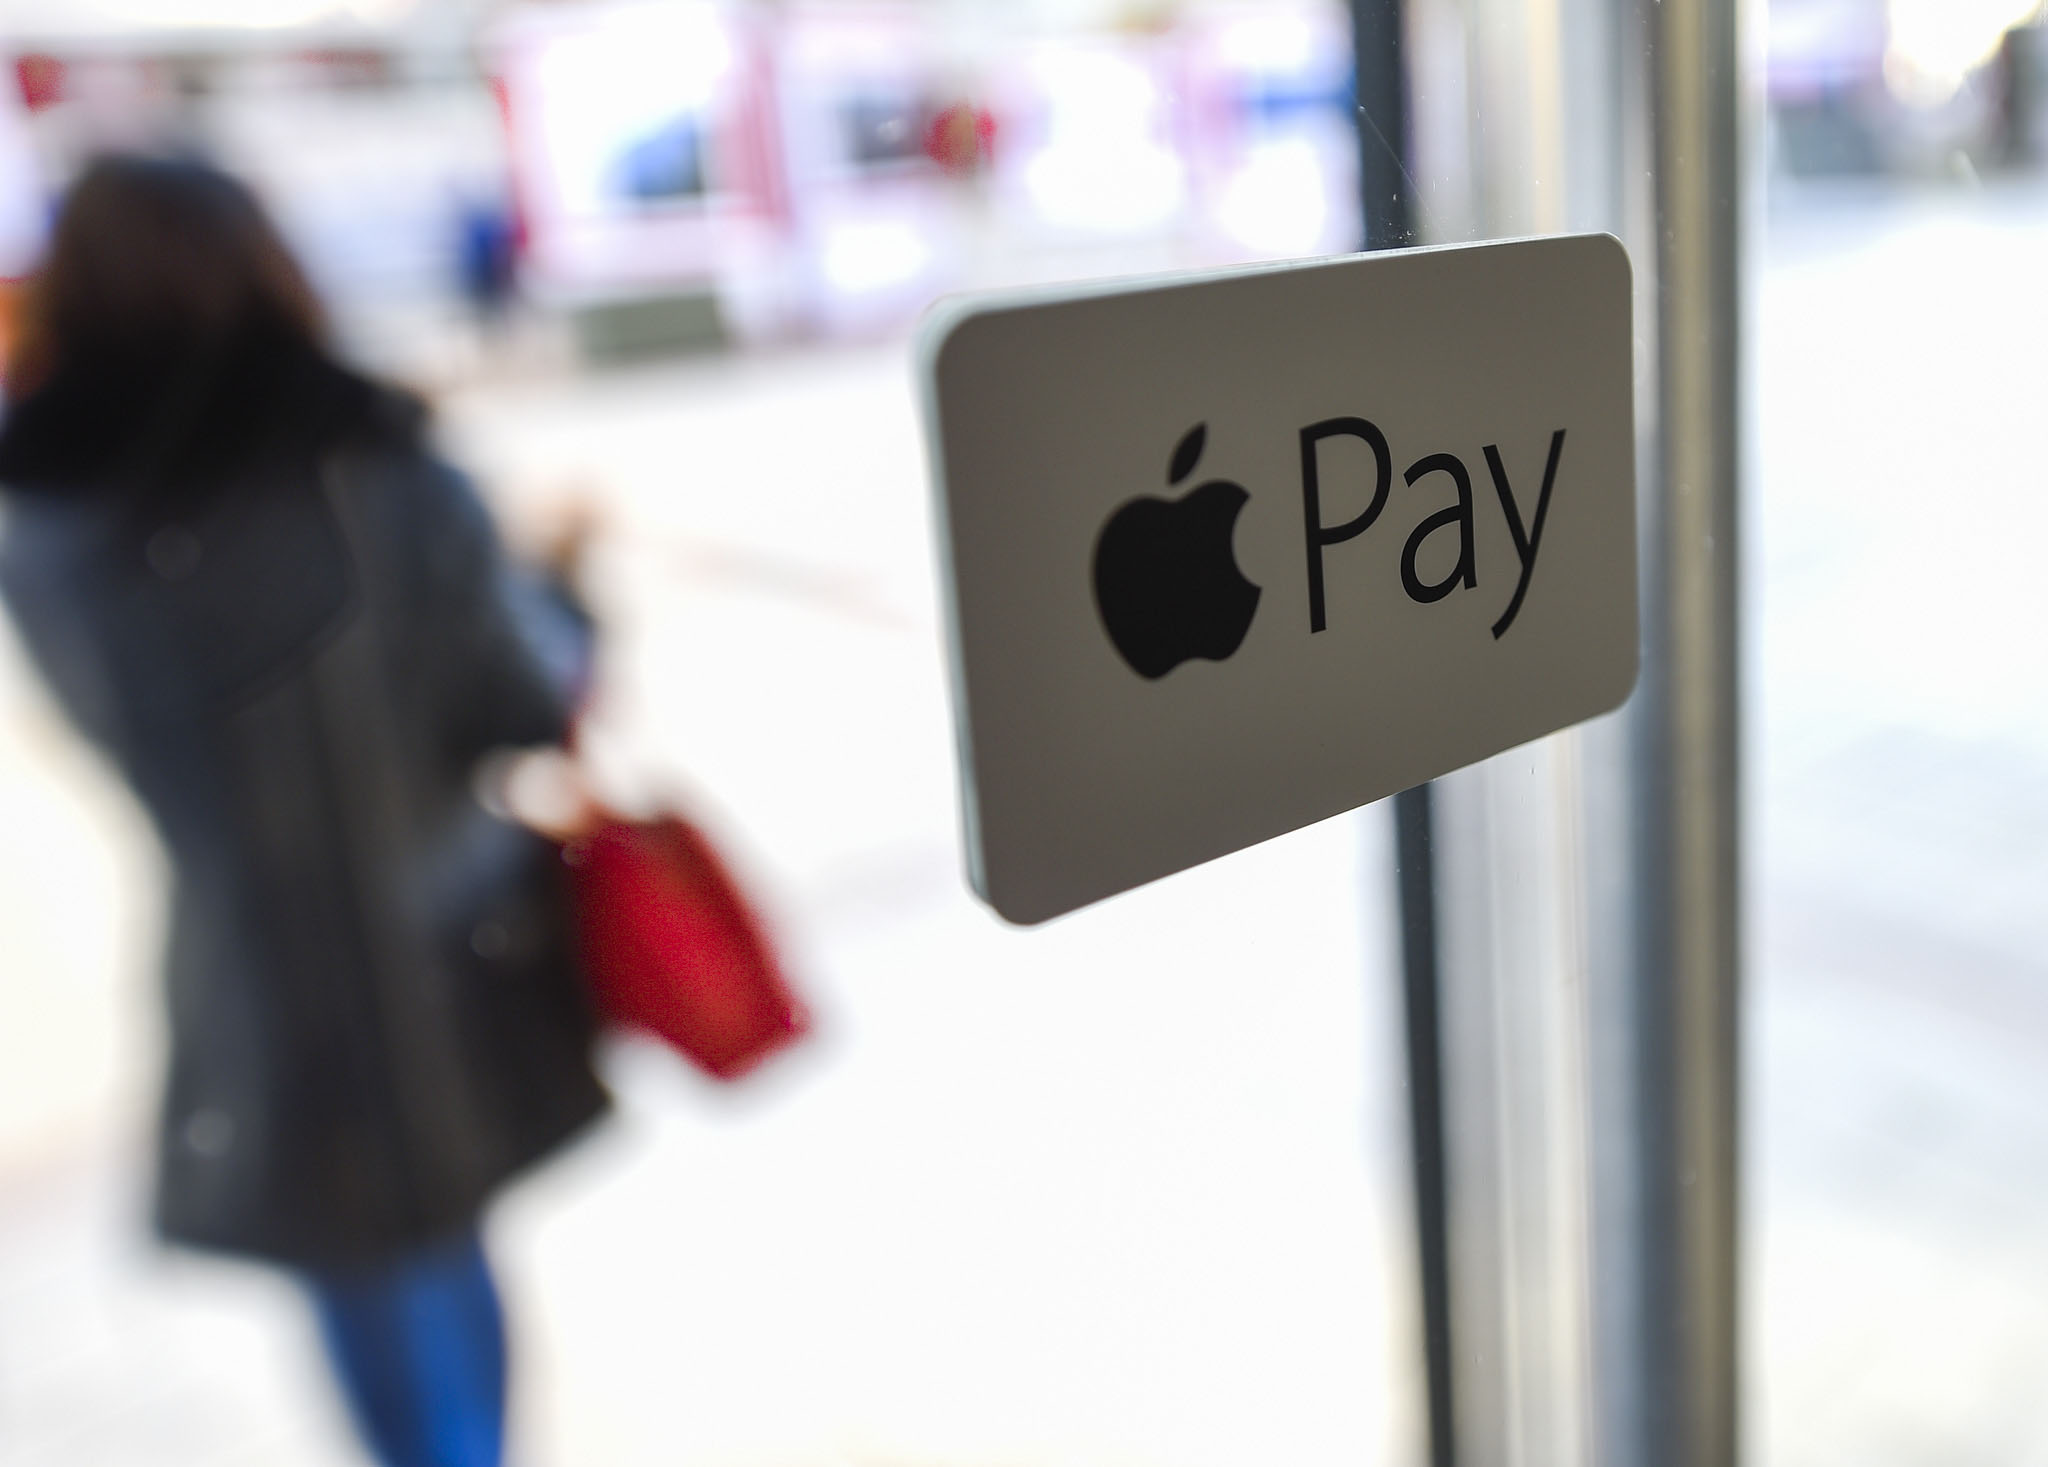 CIB Expands Use Of Apple Pay In Hungary